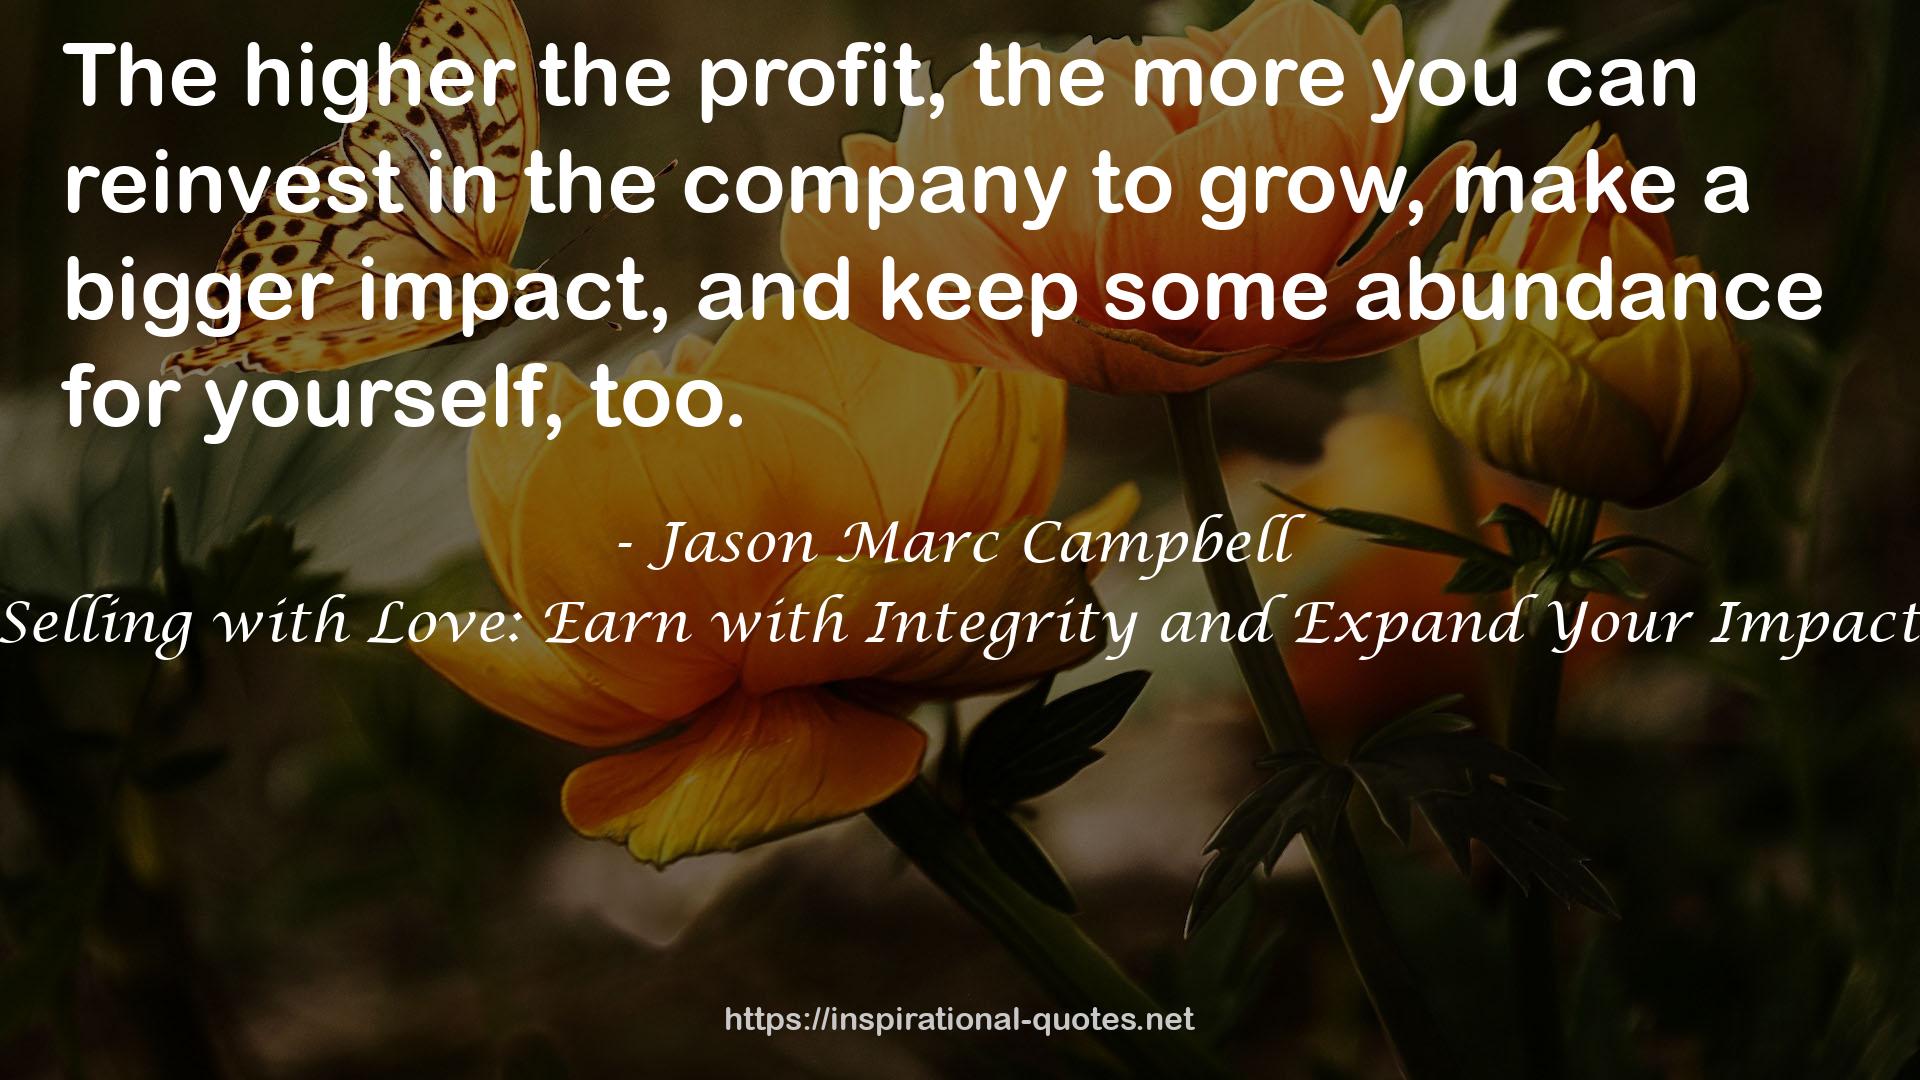 Selling with Love: Earn with Integrity and Expand Your Impact QUOTES